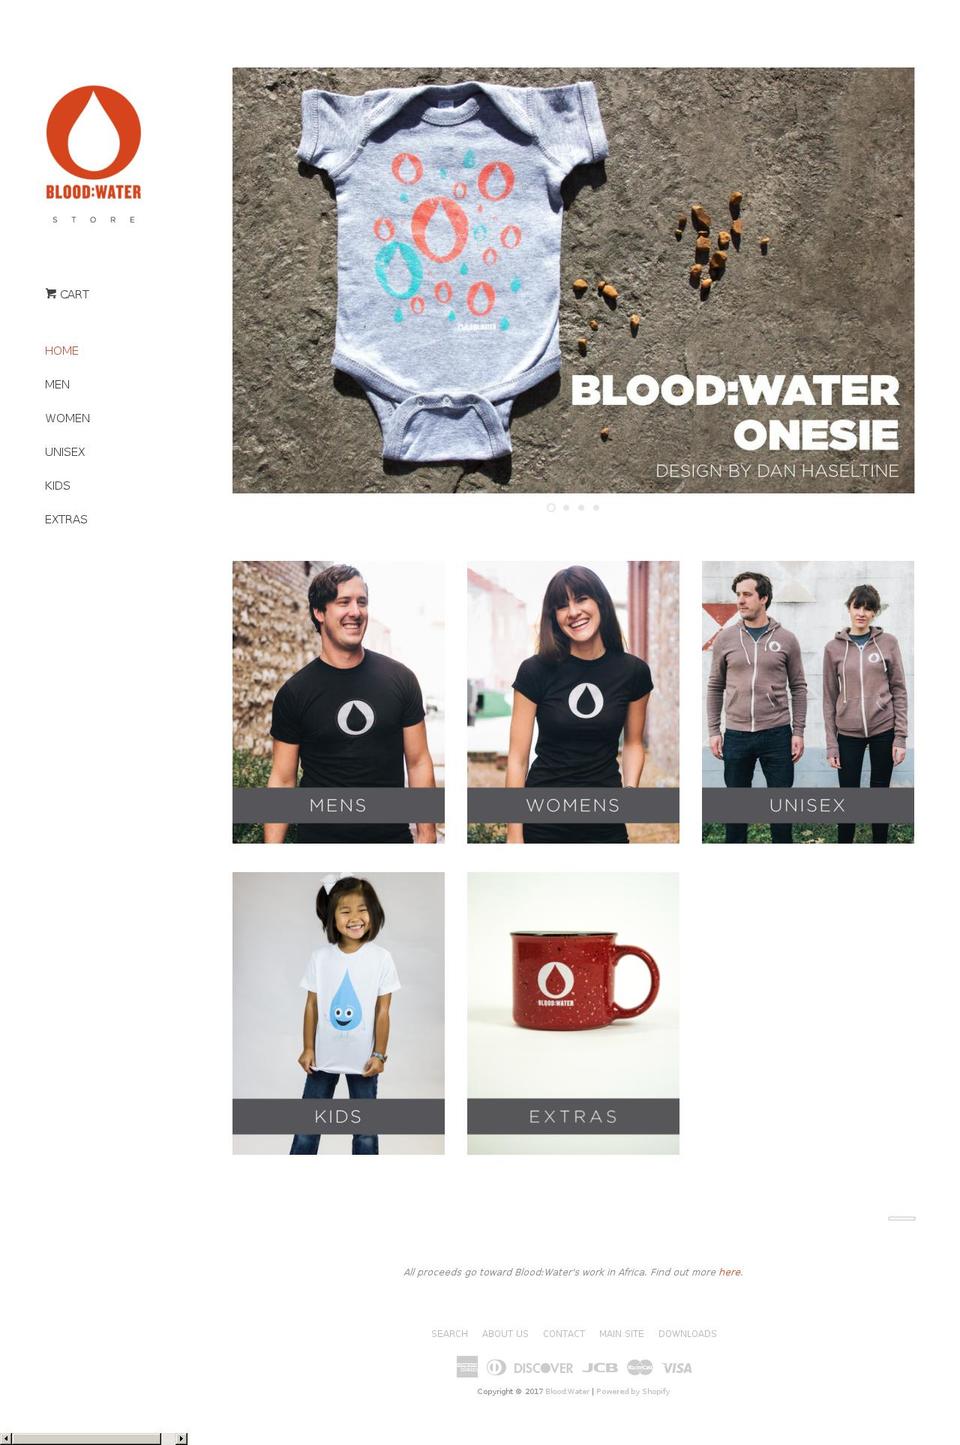 Pop Shopify theme site example bloodwaterstore.org